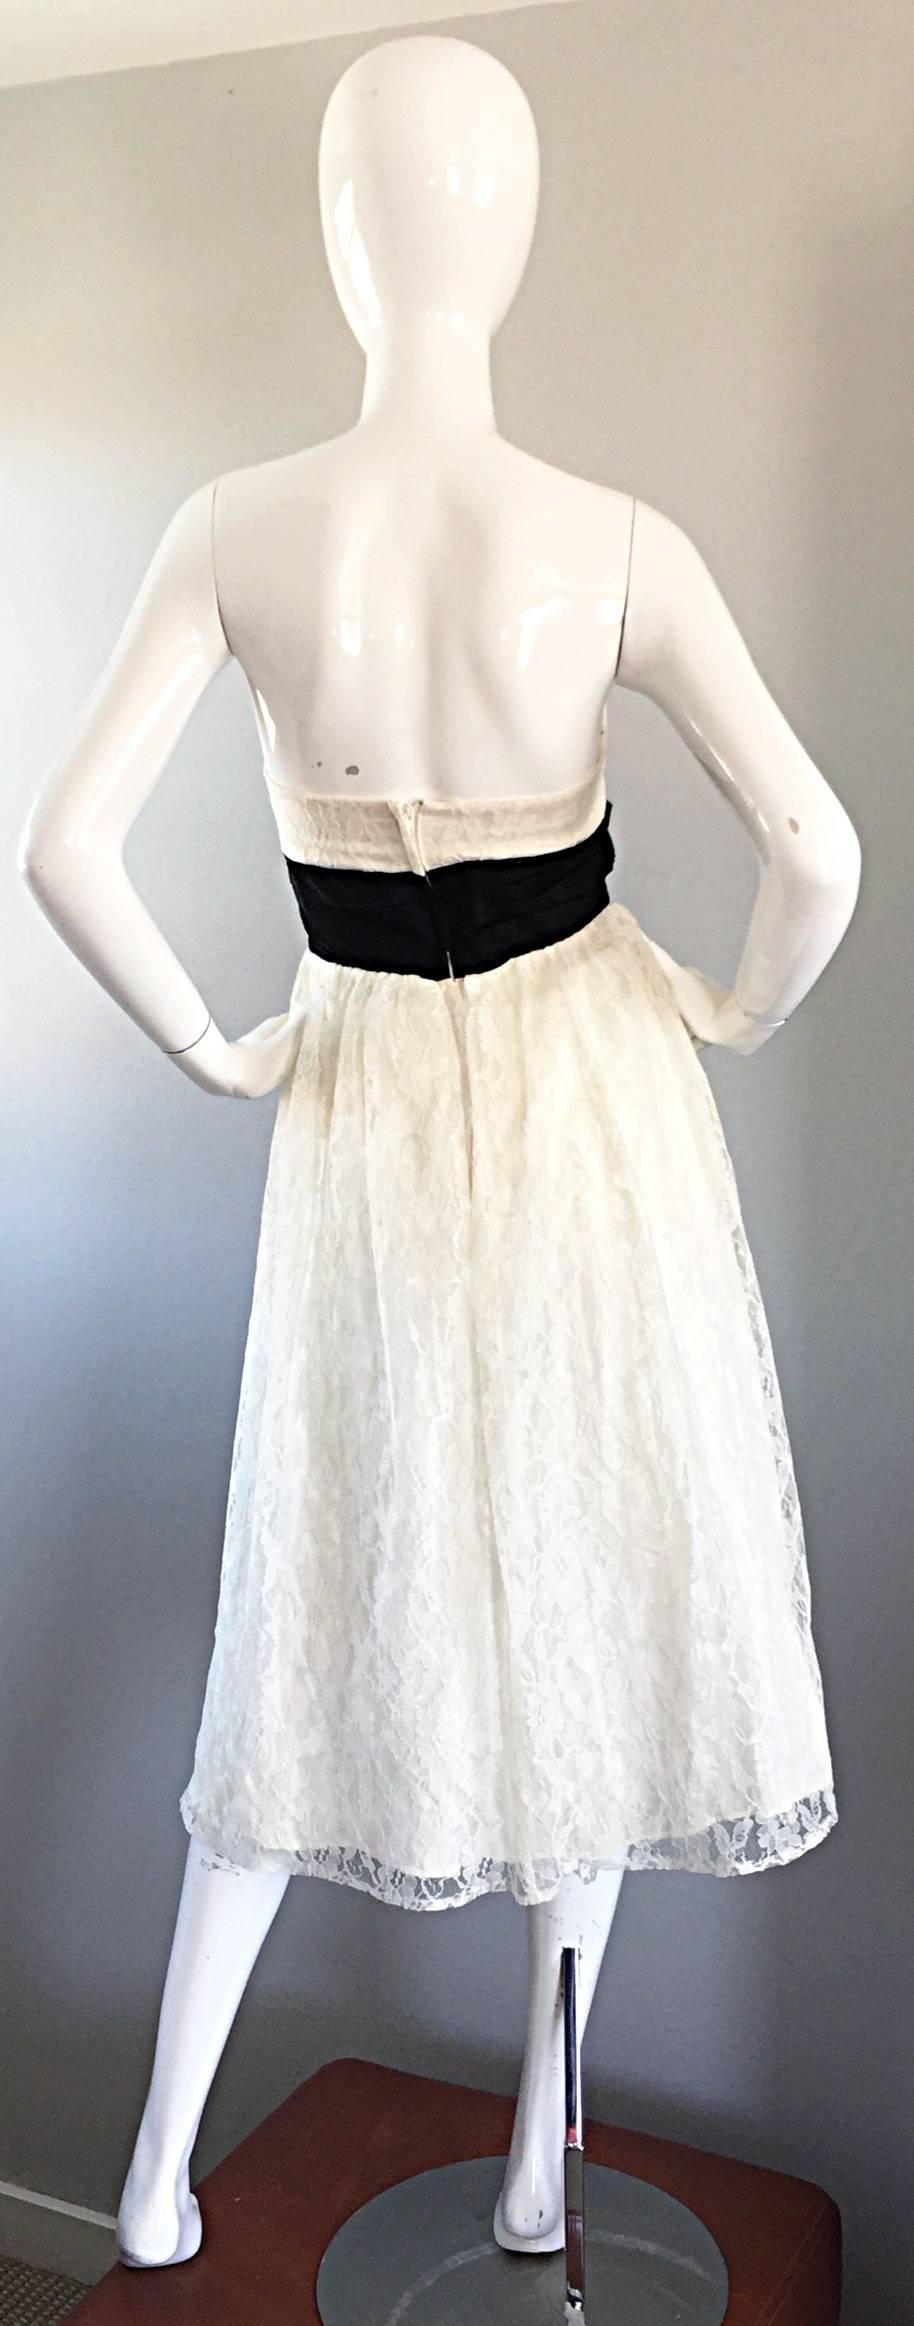 Women's Chic 1990s does 1950s White and Black Lace Strapless Vintage 90s Dress Small For Sale